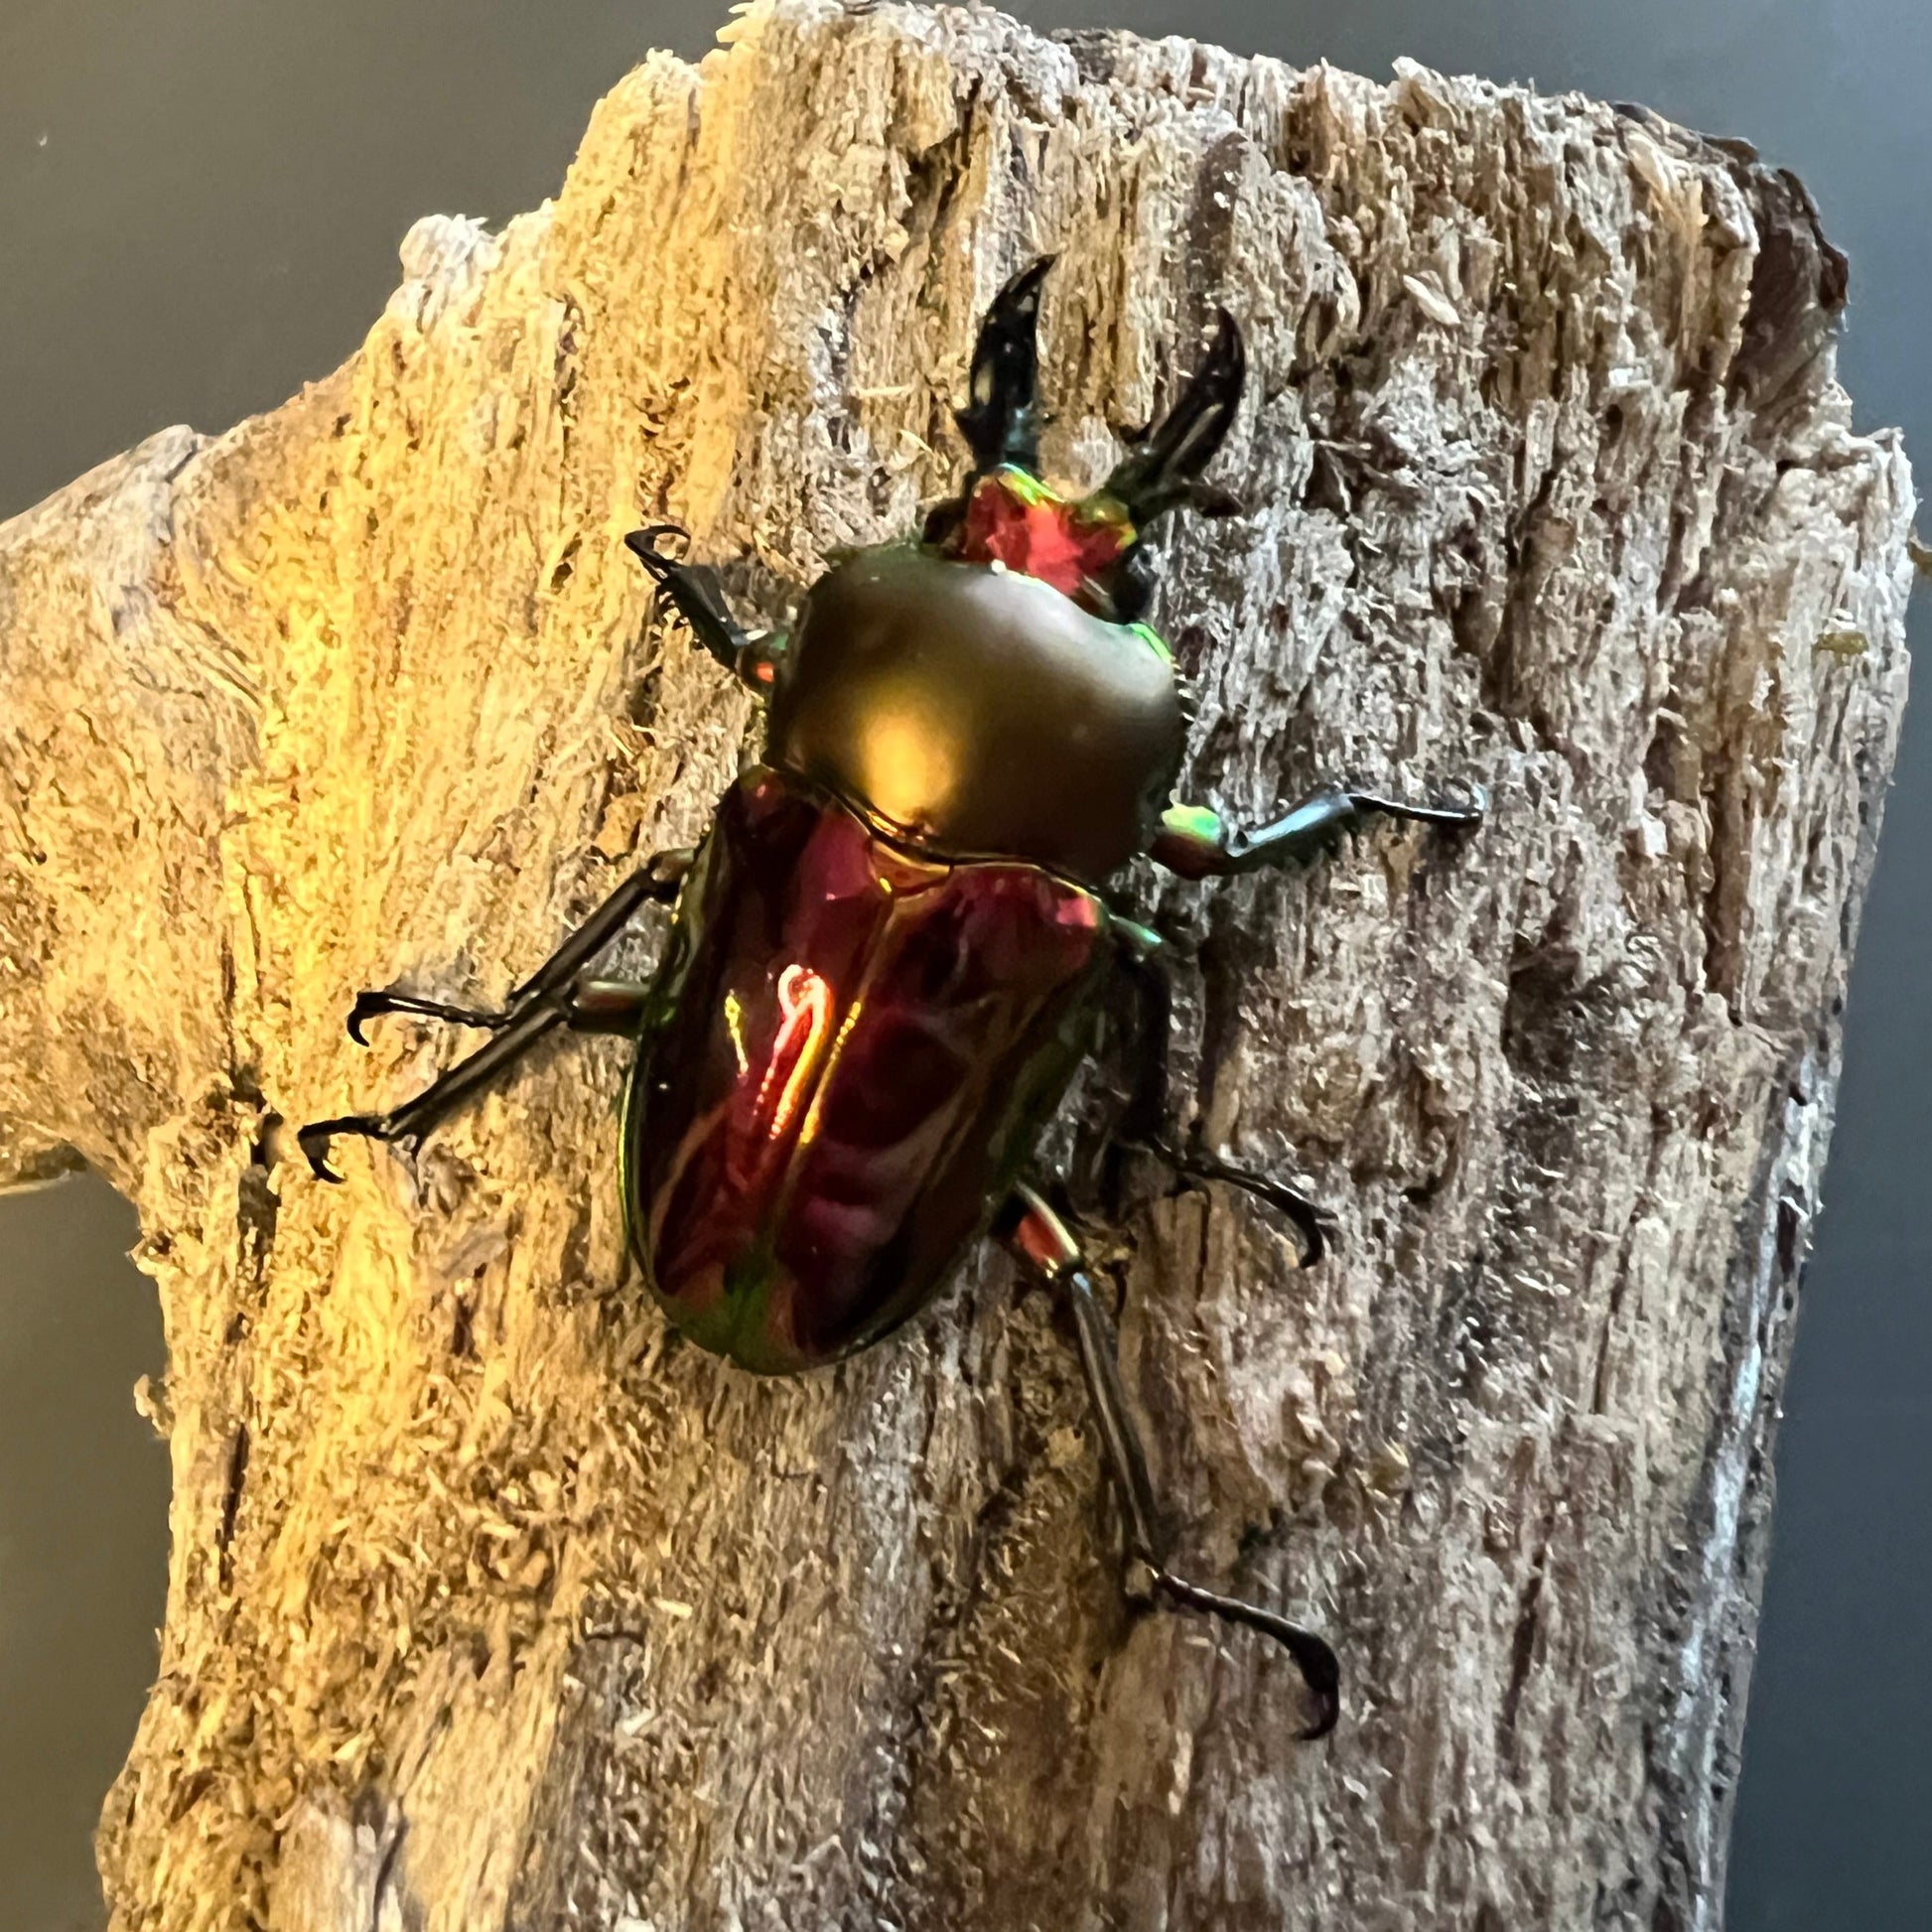 Red rainbow stag beetle major male